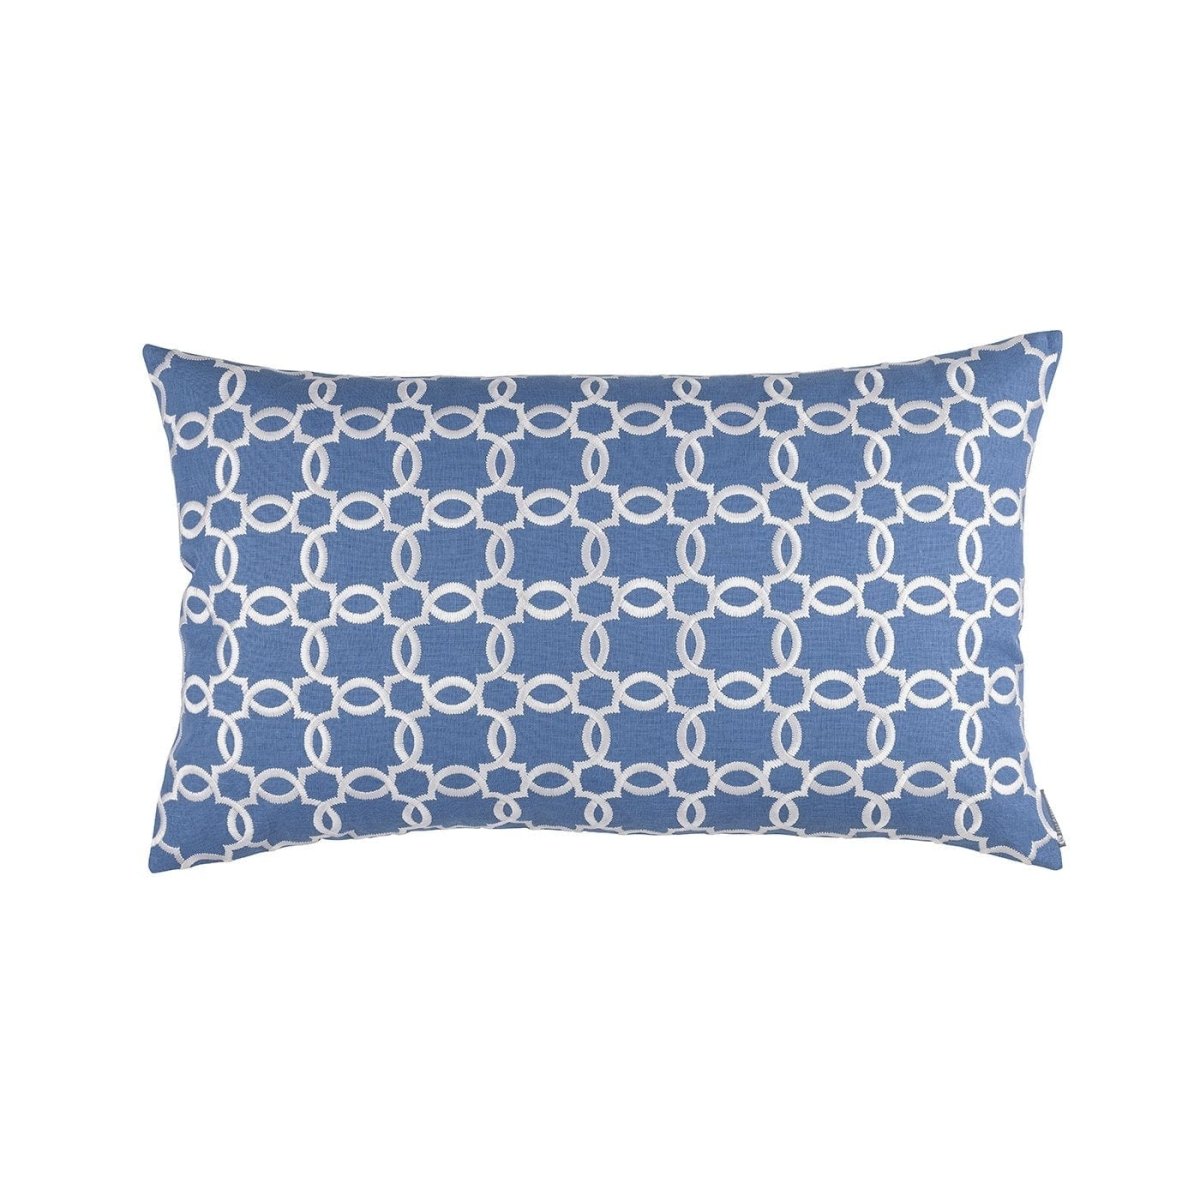 Lynx Azure & White Large Pillow by Lili Alessandra | Fig Linens